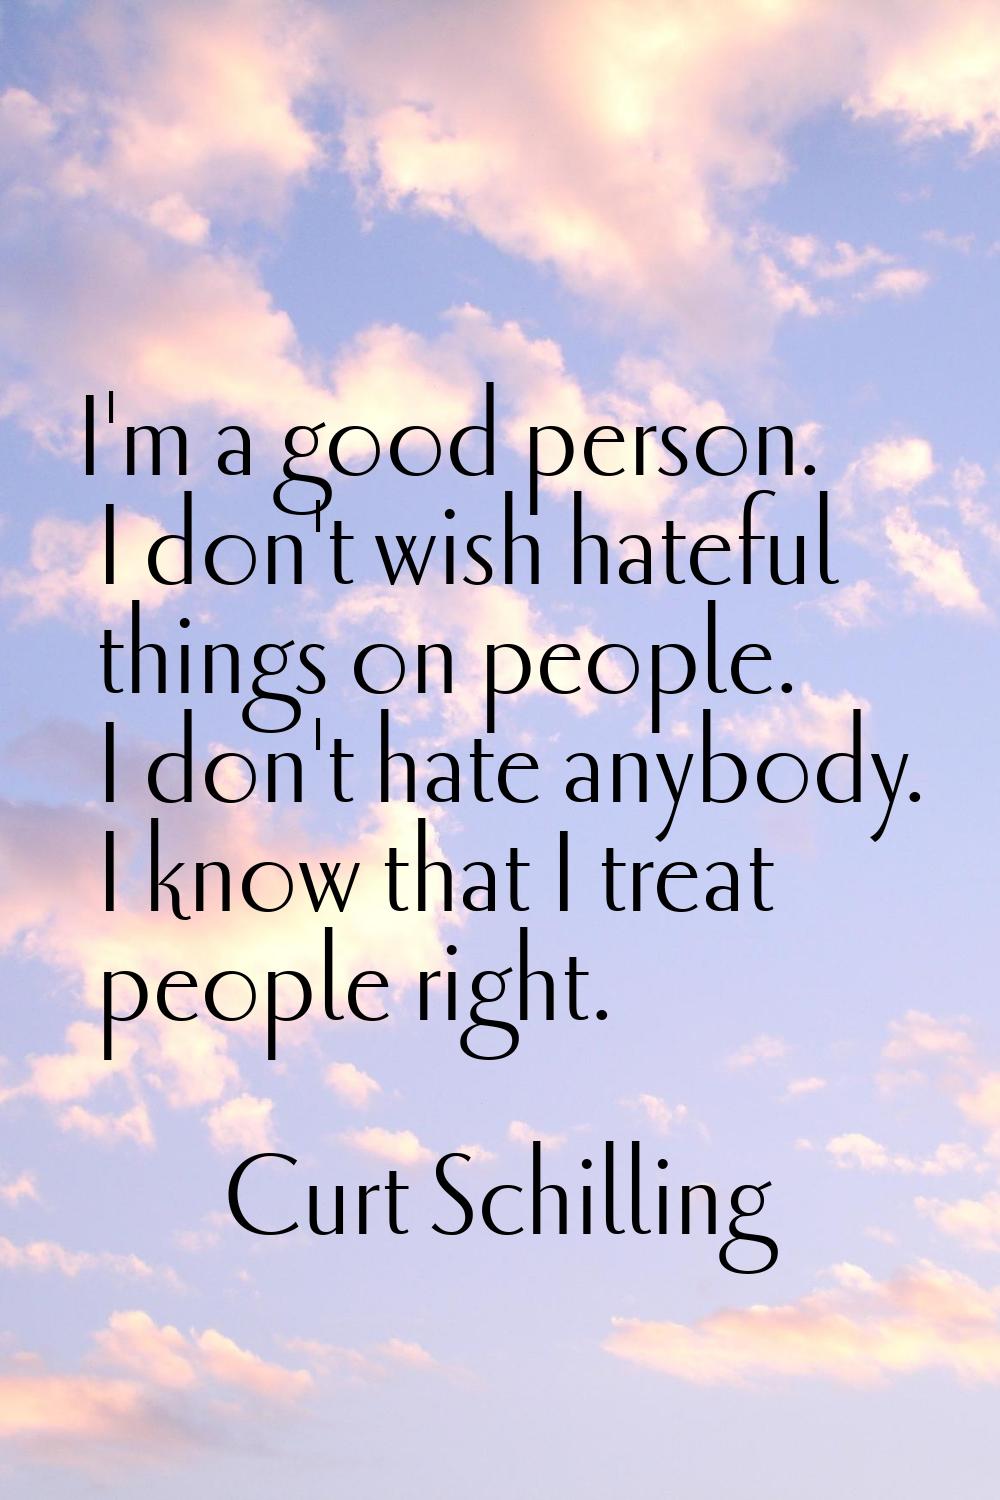 I'm a good person. I don't wish hateful things on people. I don't hate anybody. I know that I treat